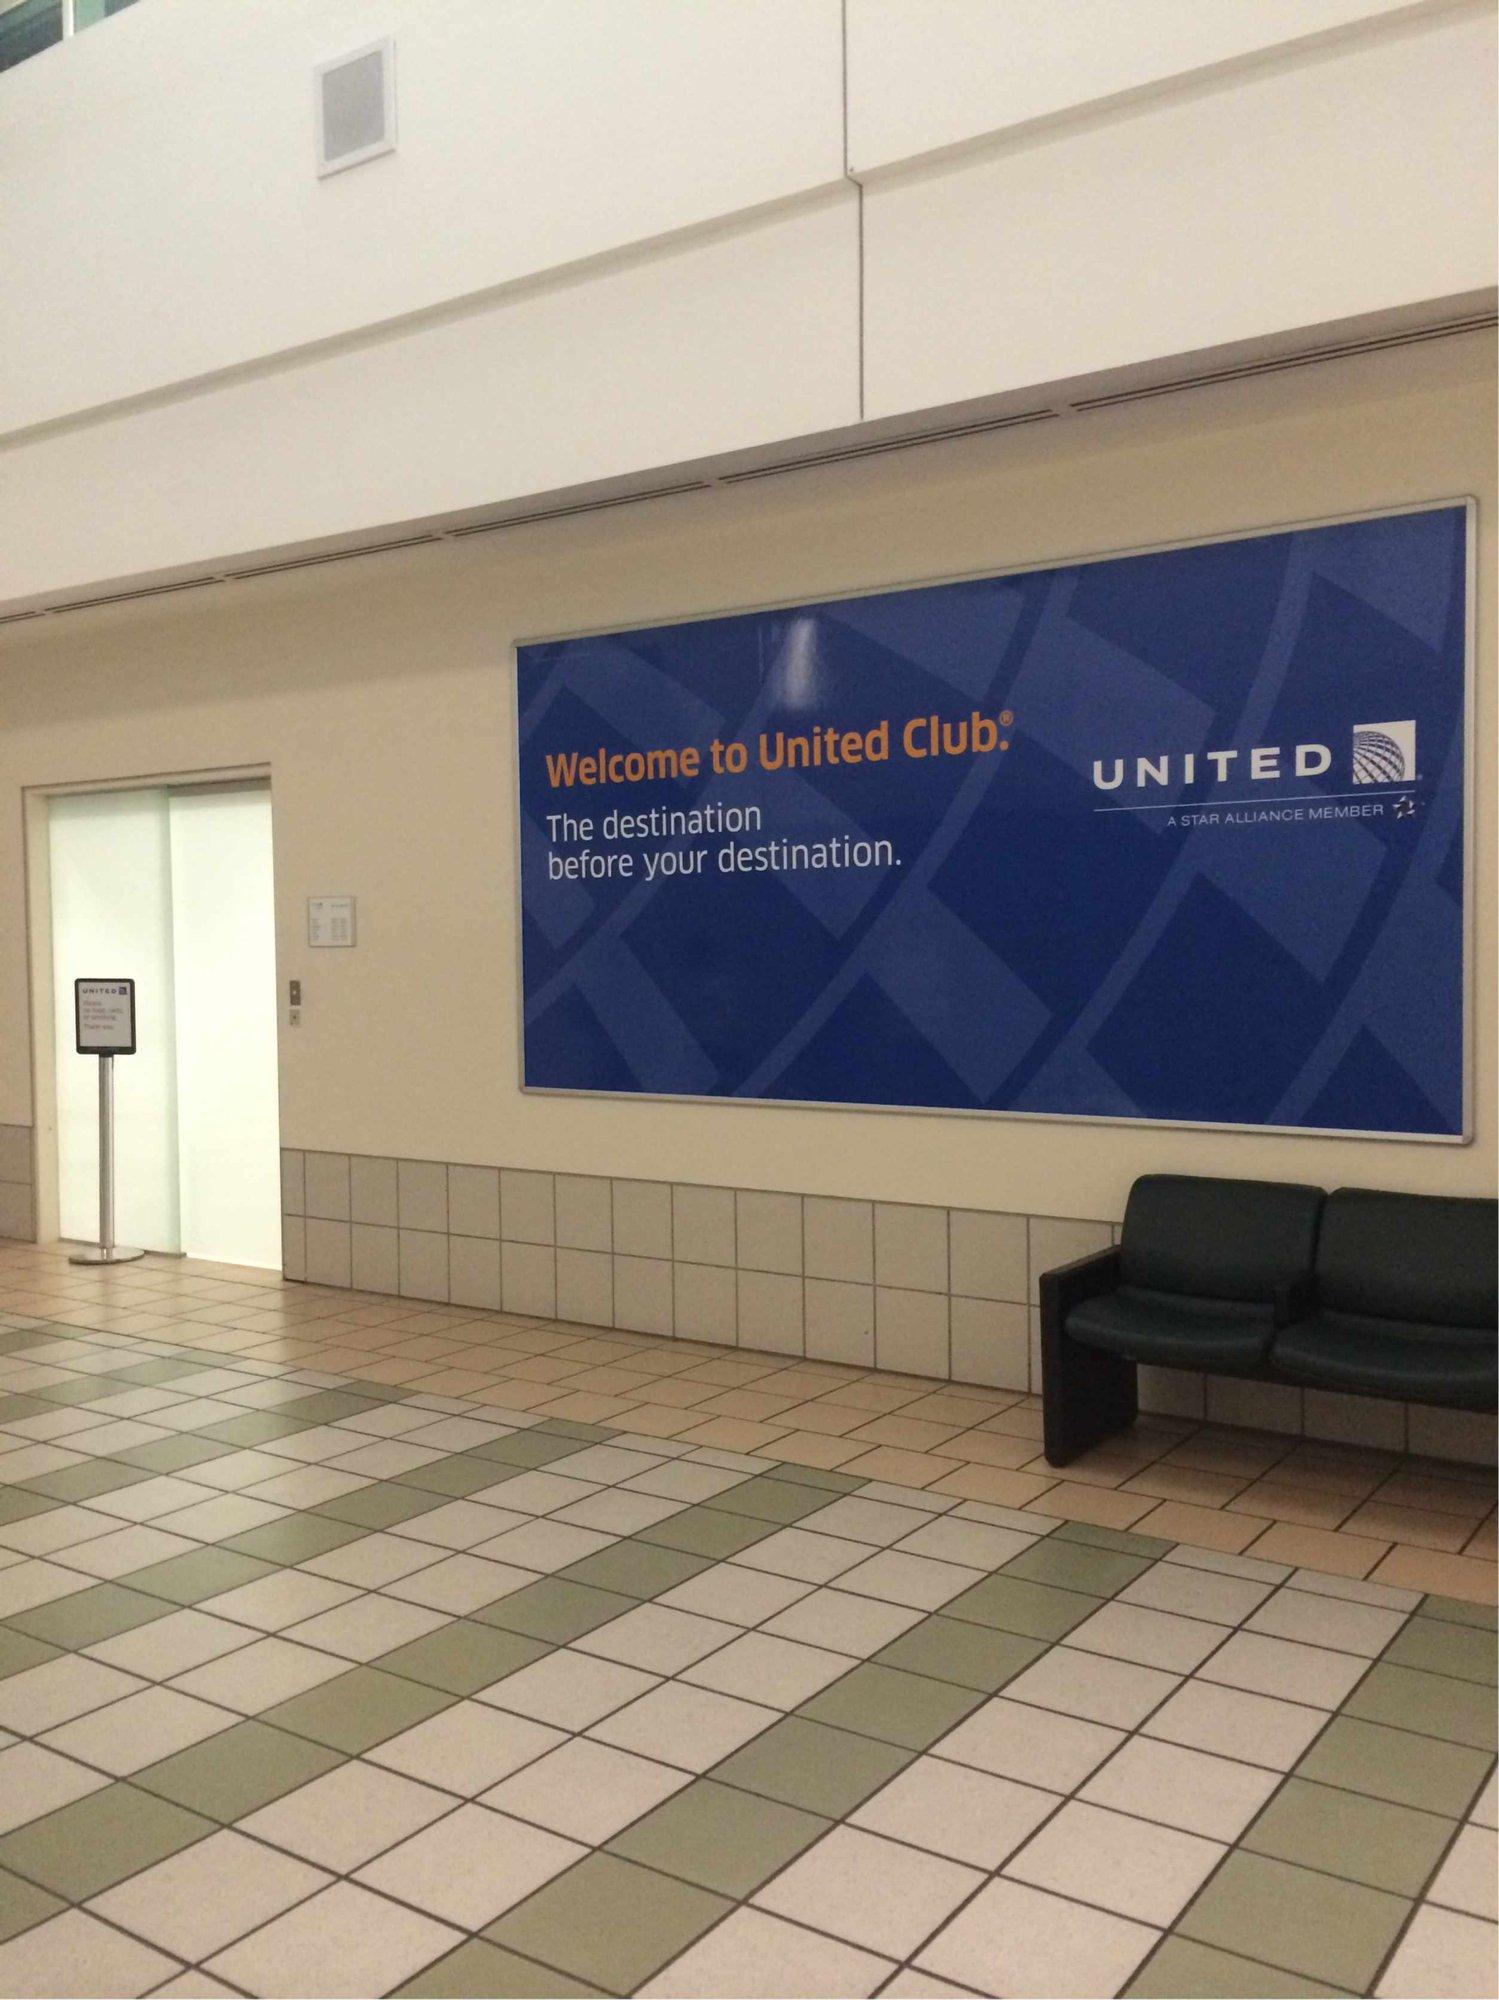 United Airlines United Club image 25 of 40